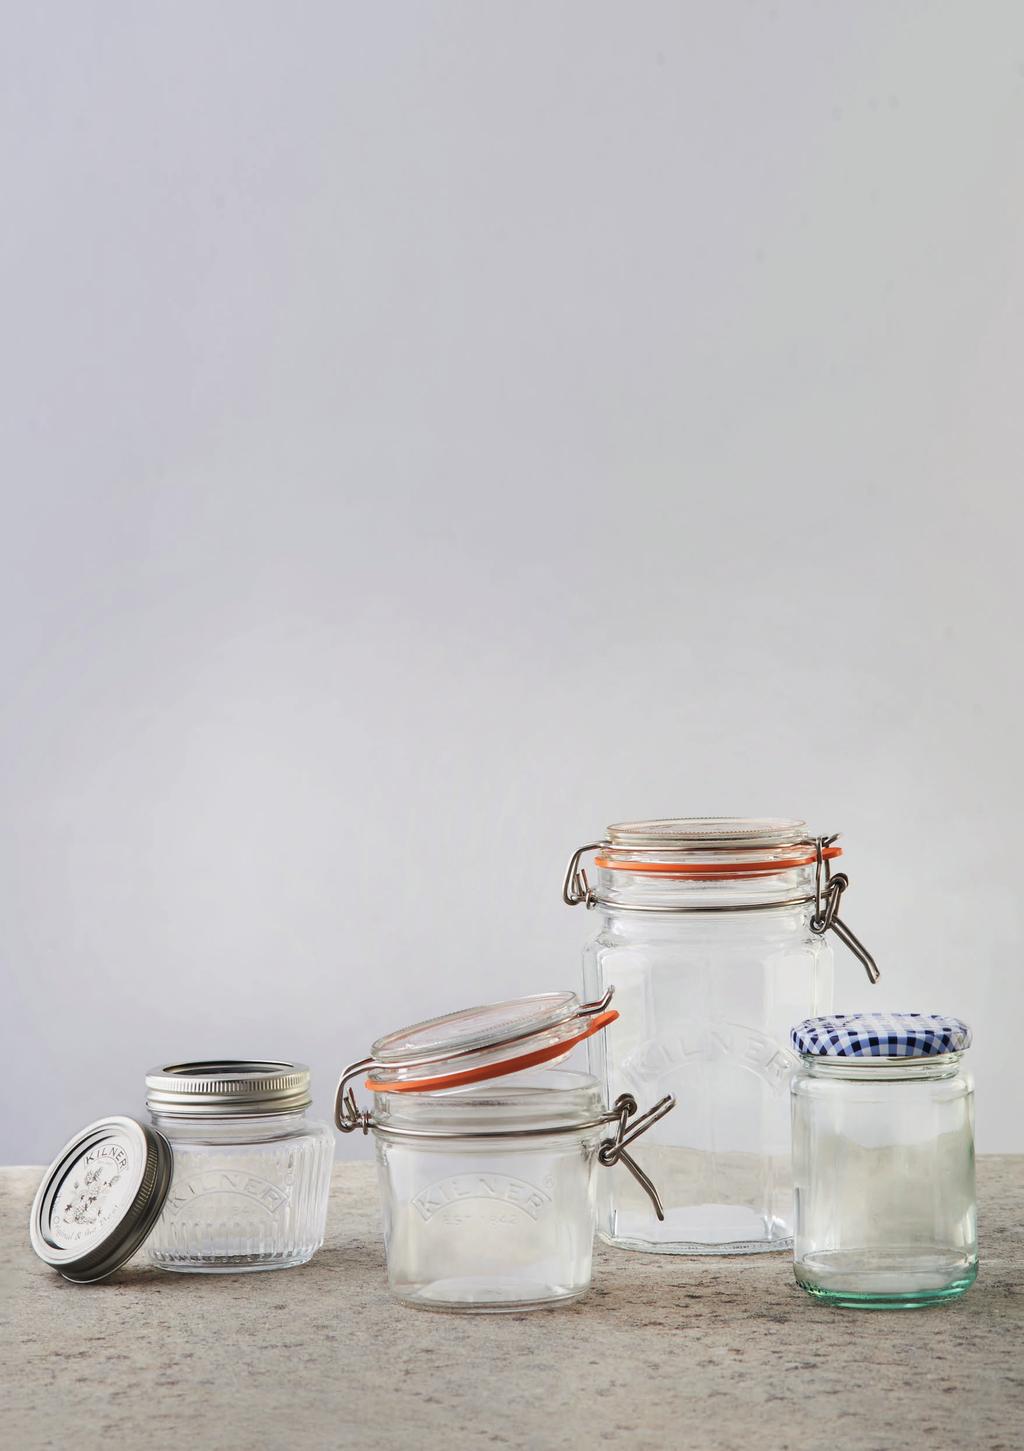 Sterilizing Kilner Jars Essential for the preserving process, sterilizing jars is required to remove all bacteria, yeasts, fungi and organisms from the jar, so that when preserving, the food remains